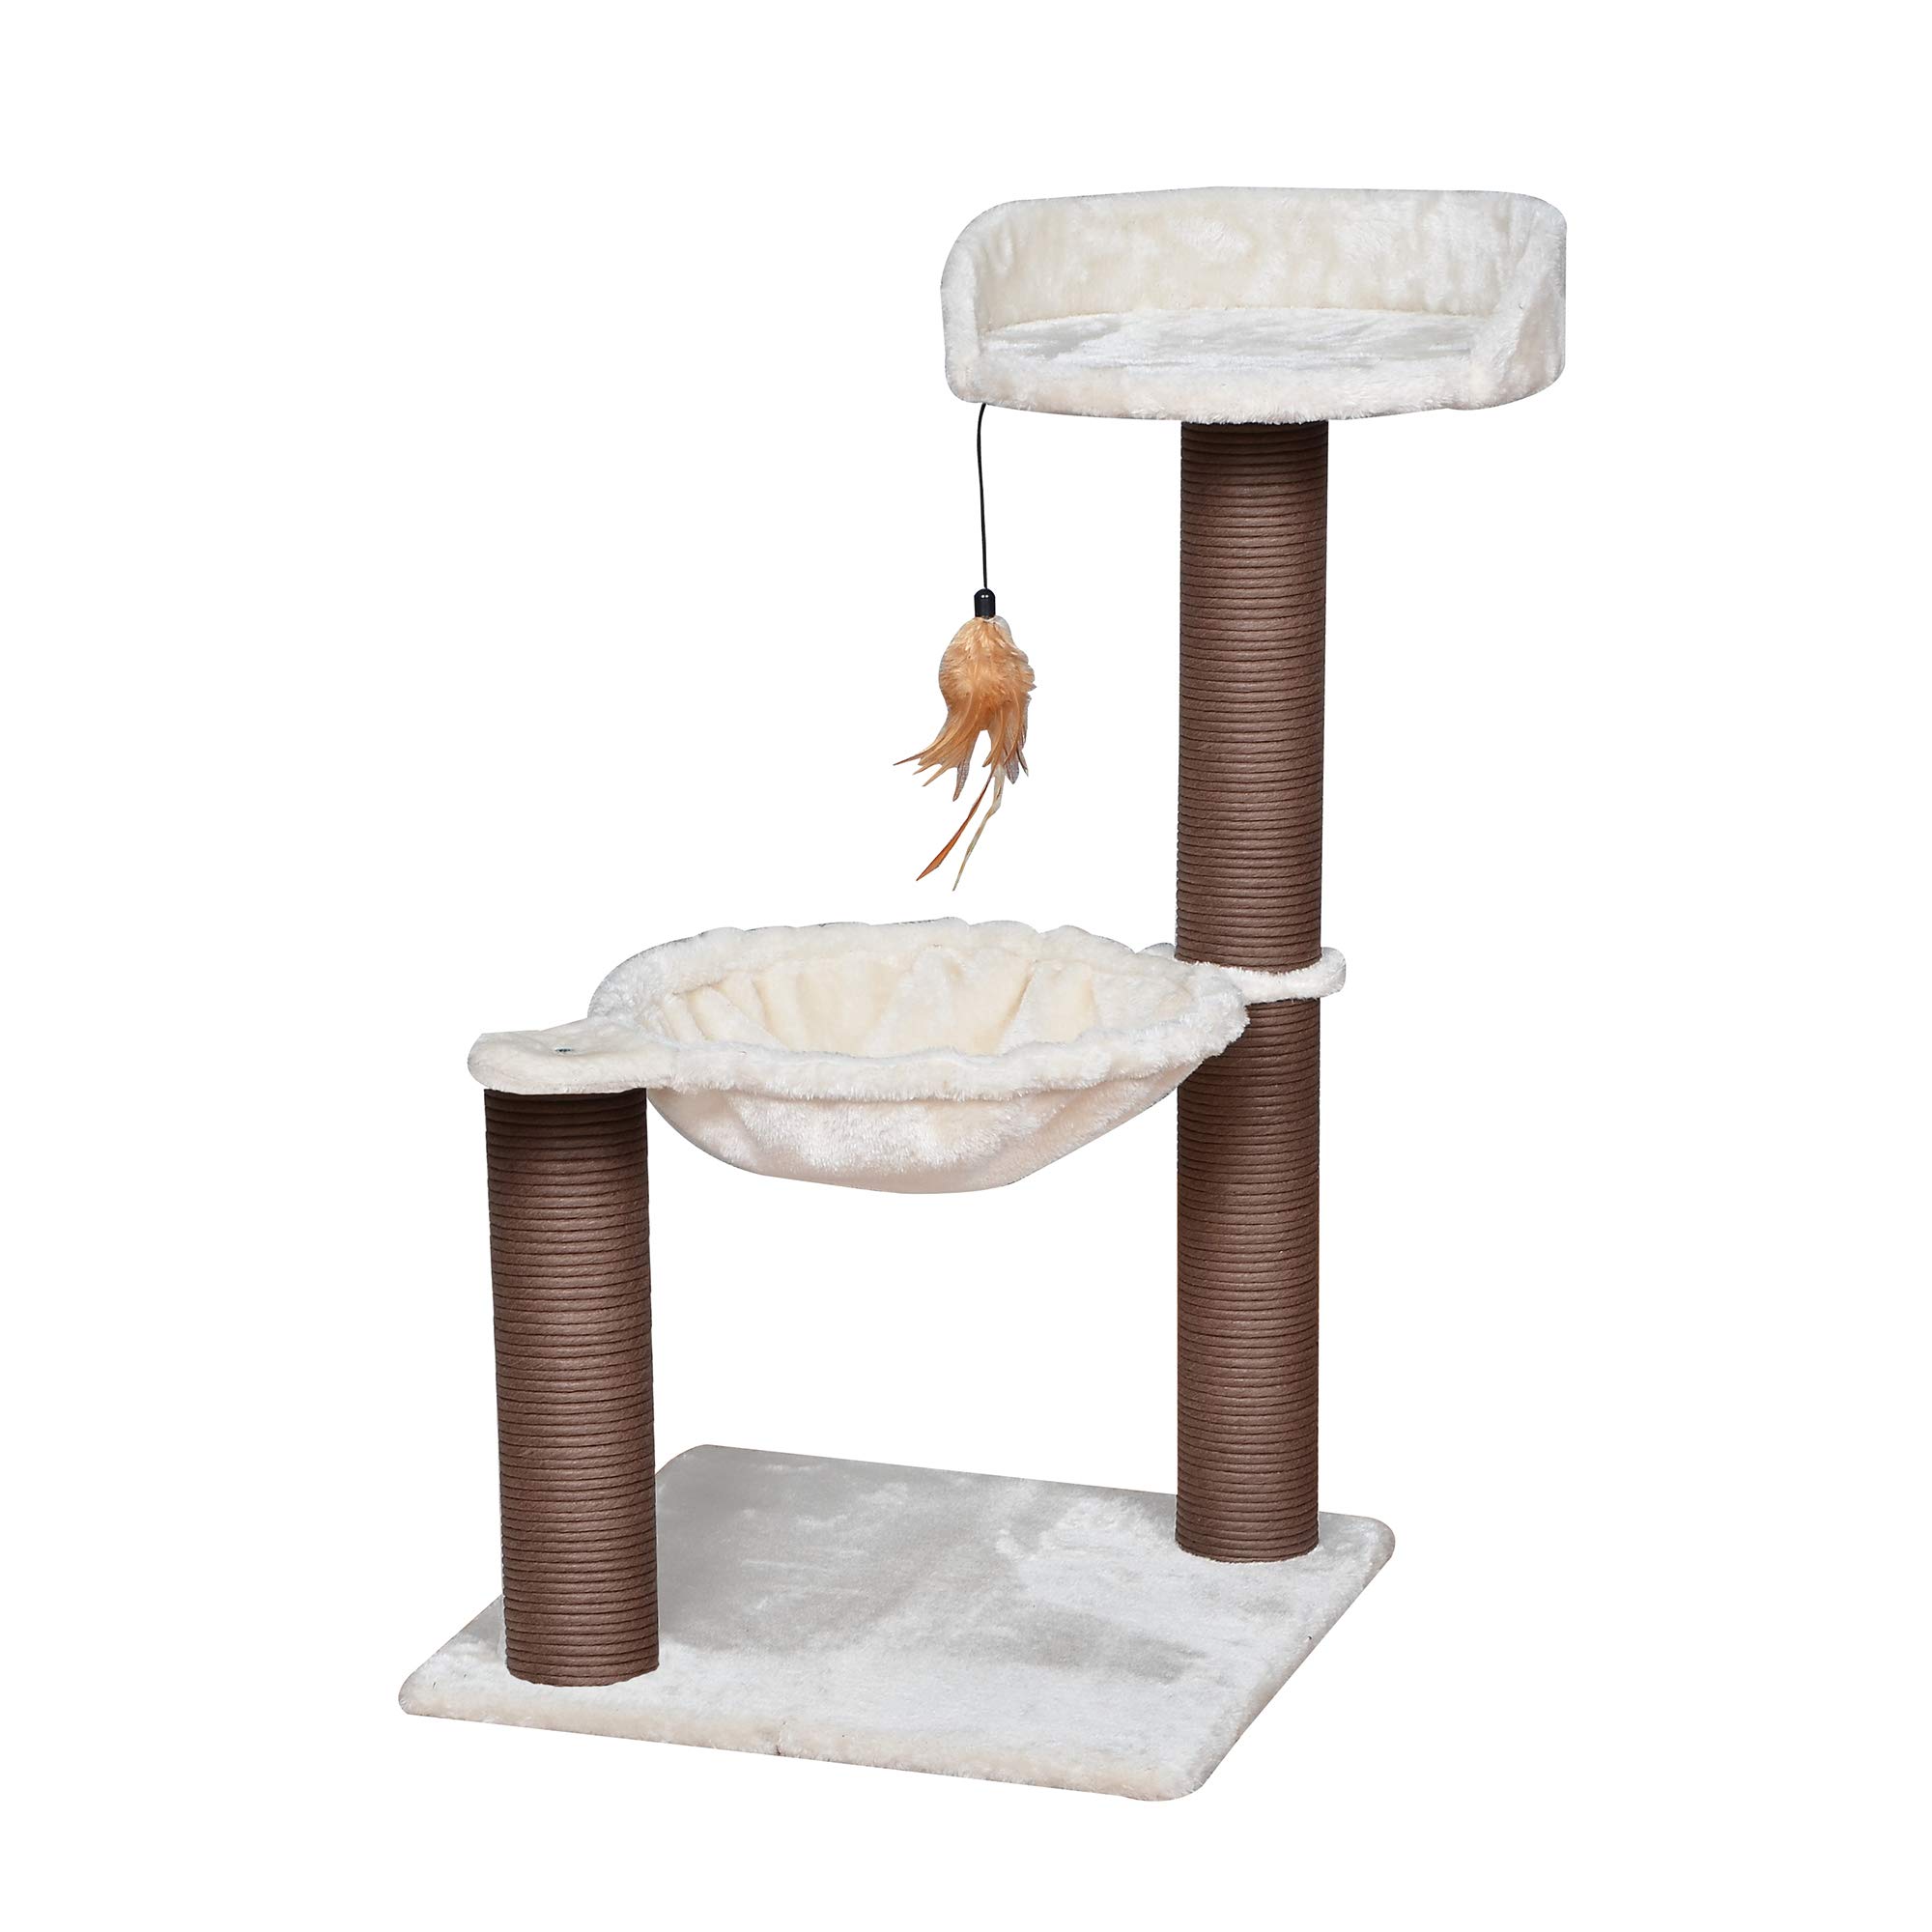 Catry, Cat Tree Hammock Bed with Natural Paper Rope